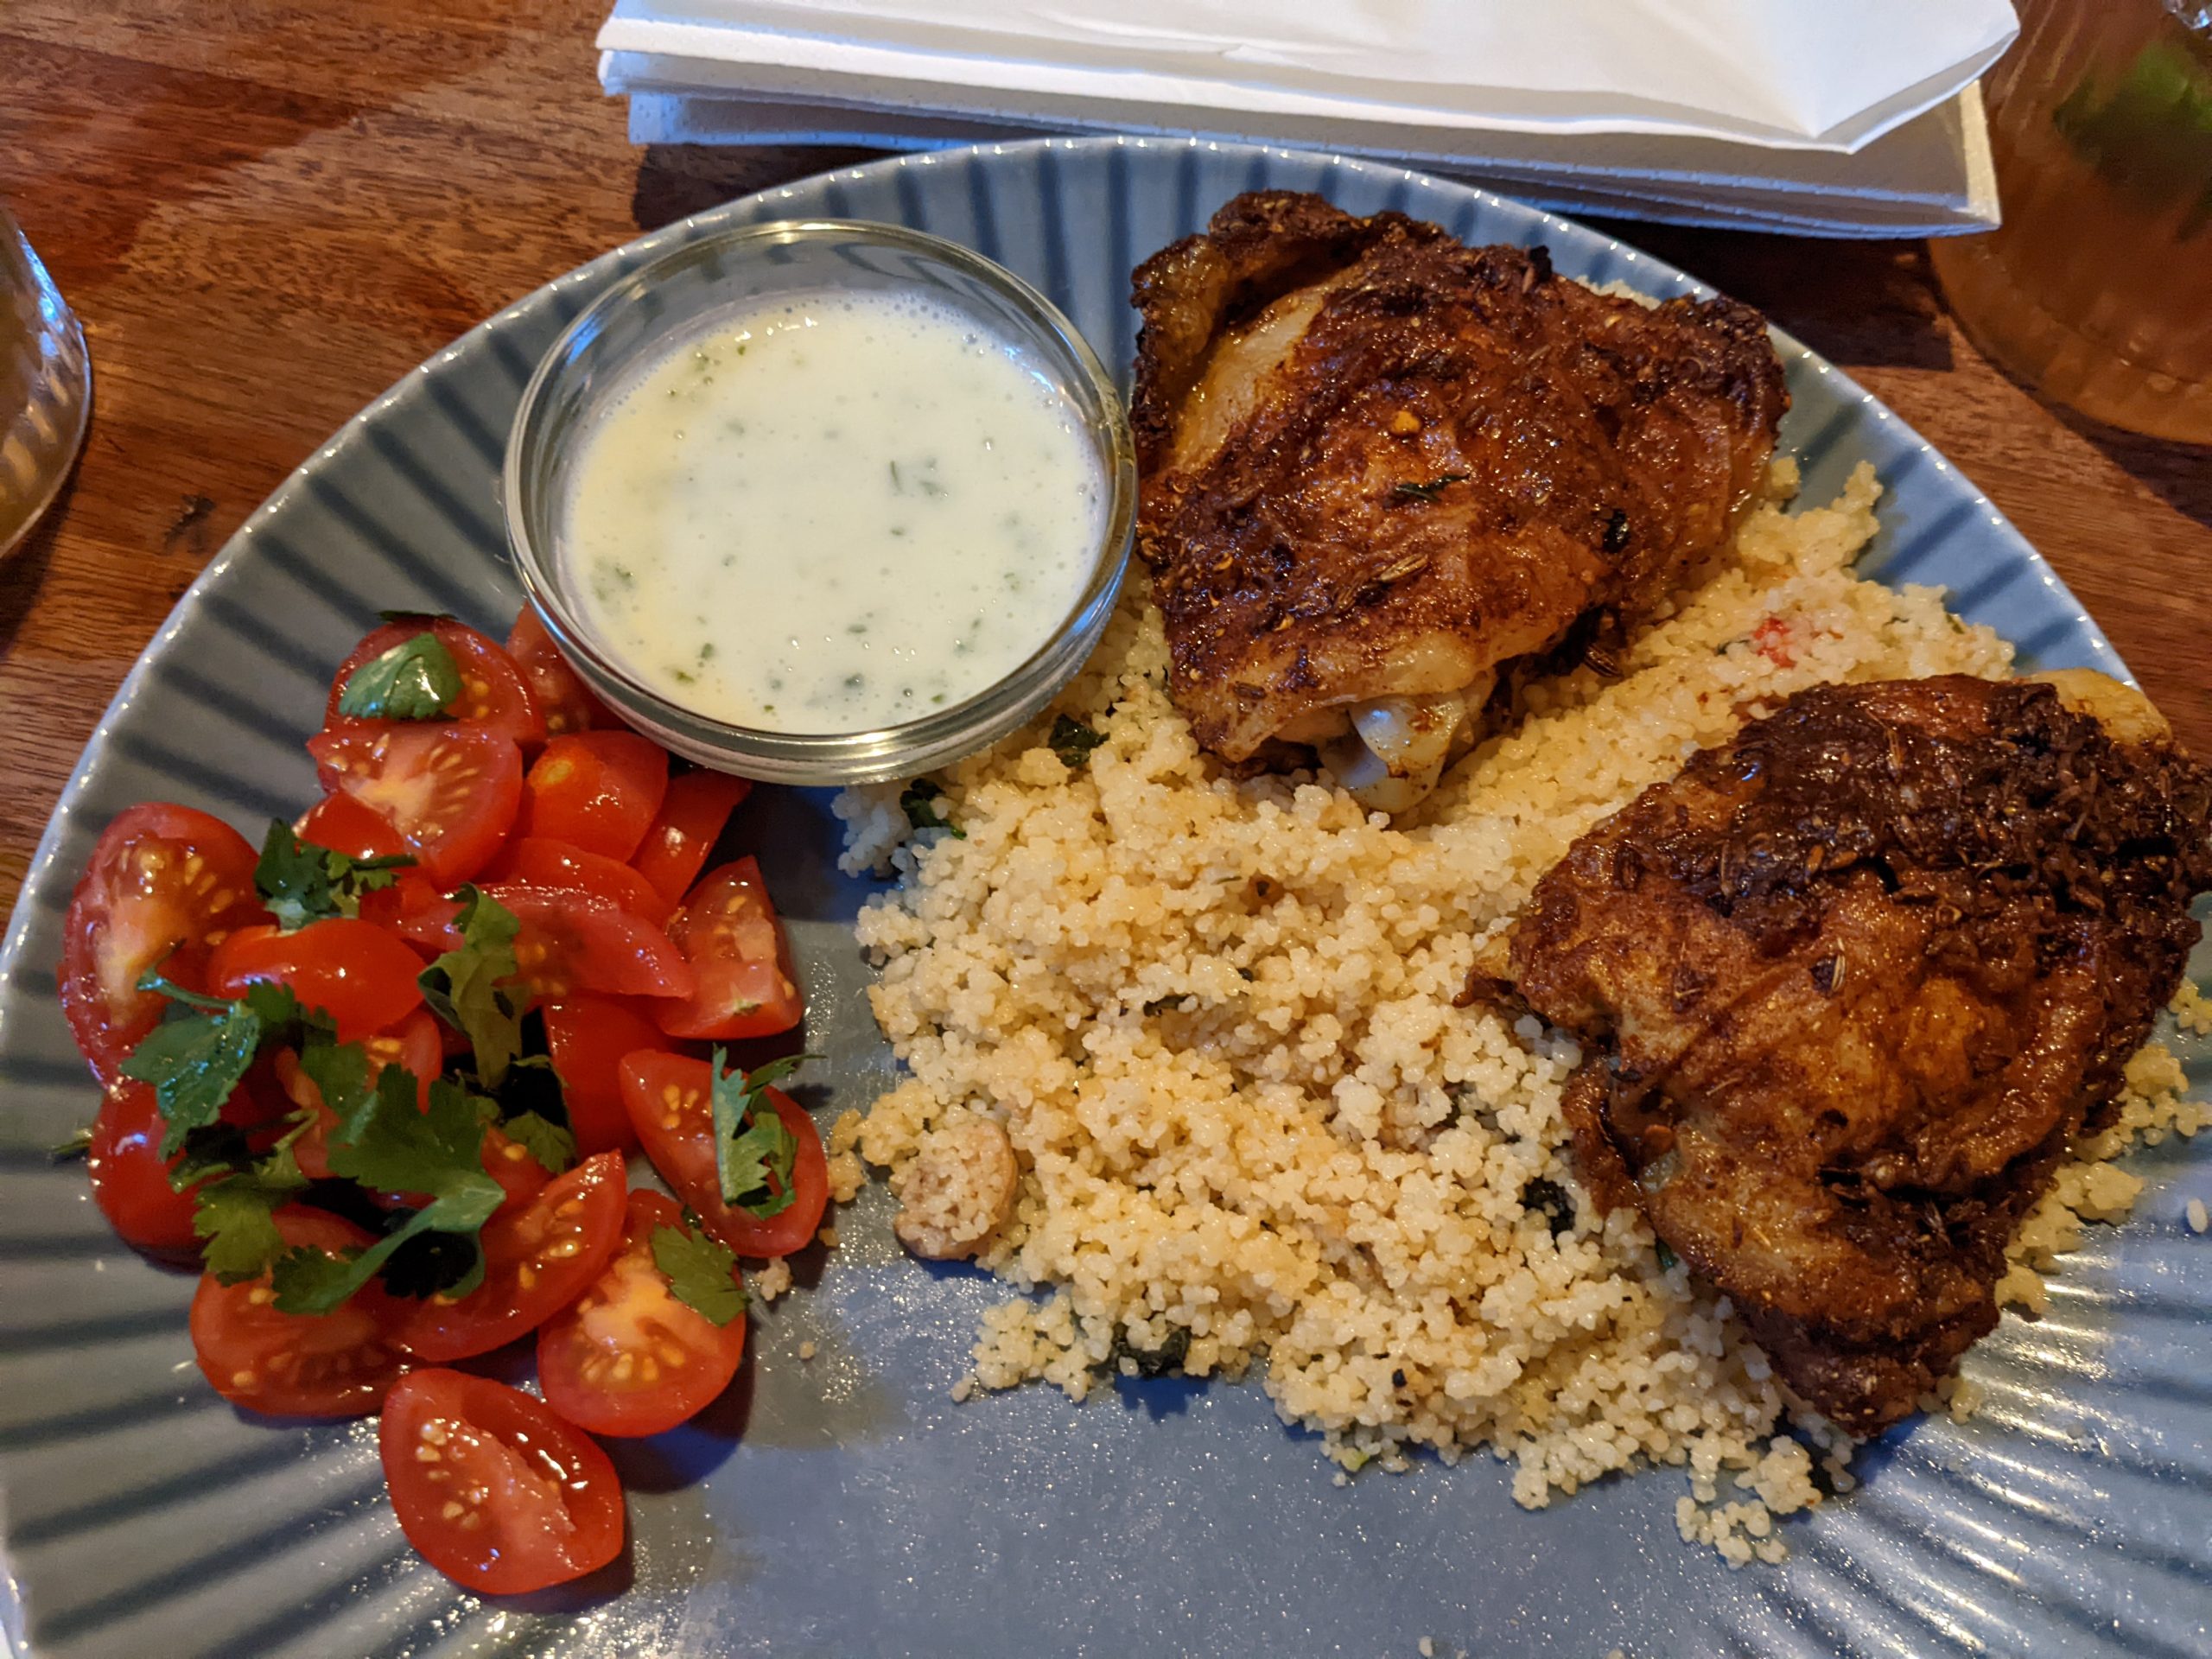 A blue plate with tomatoes, couscous, and grilled chicken